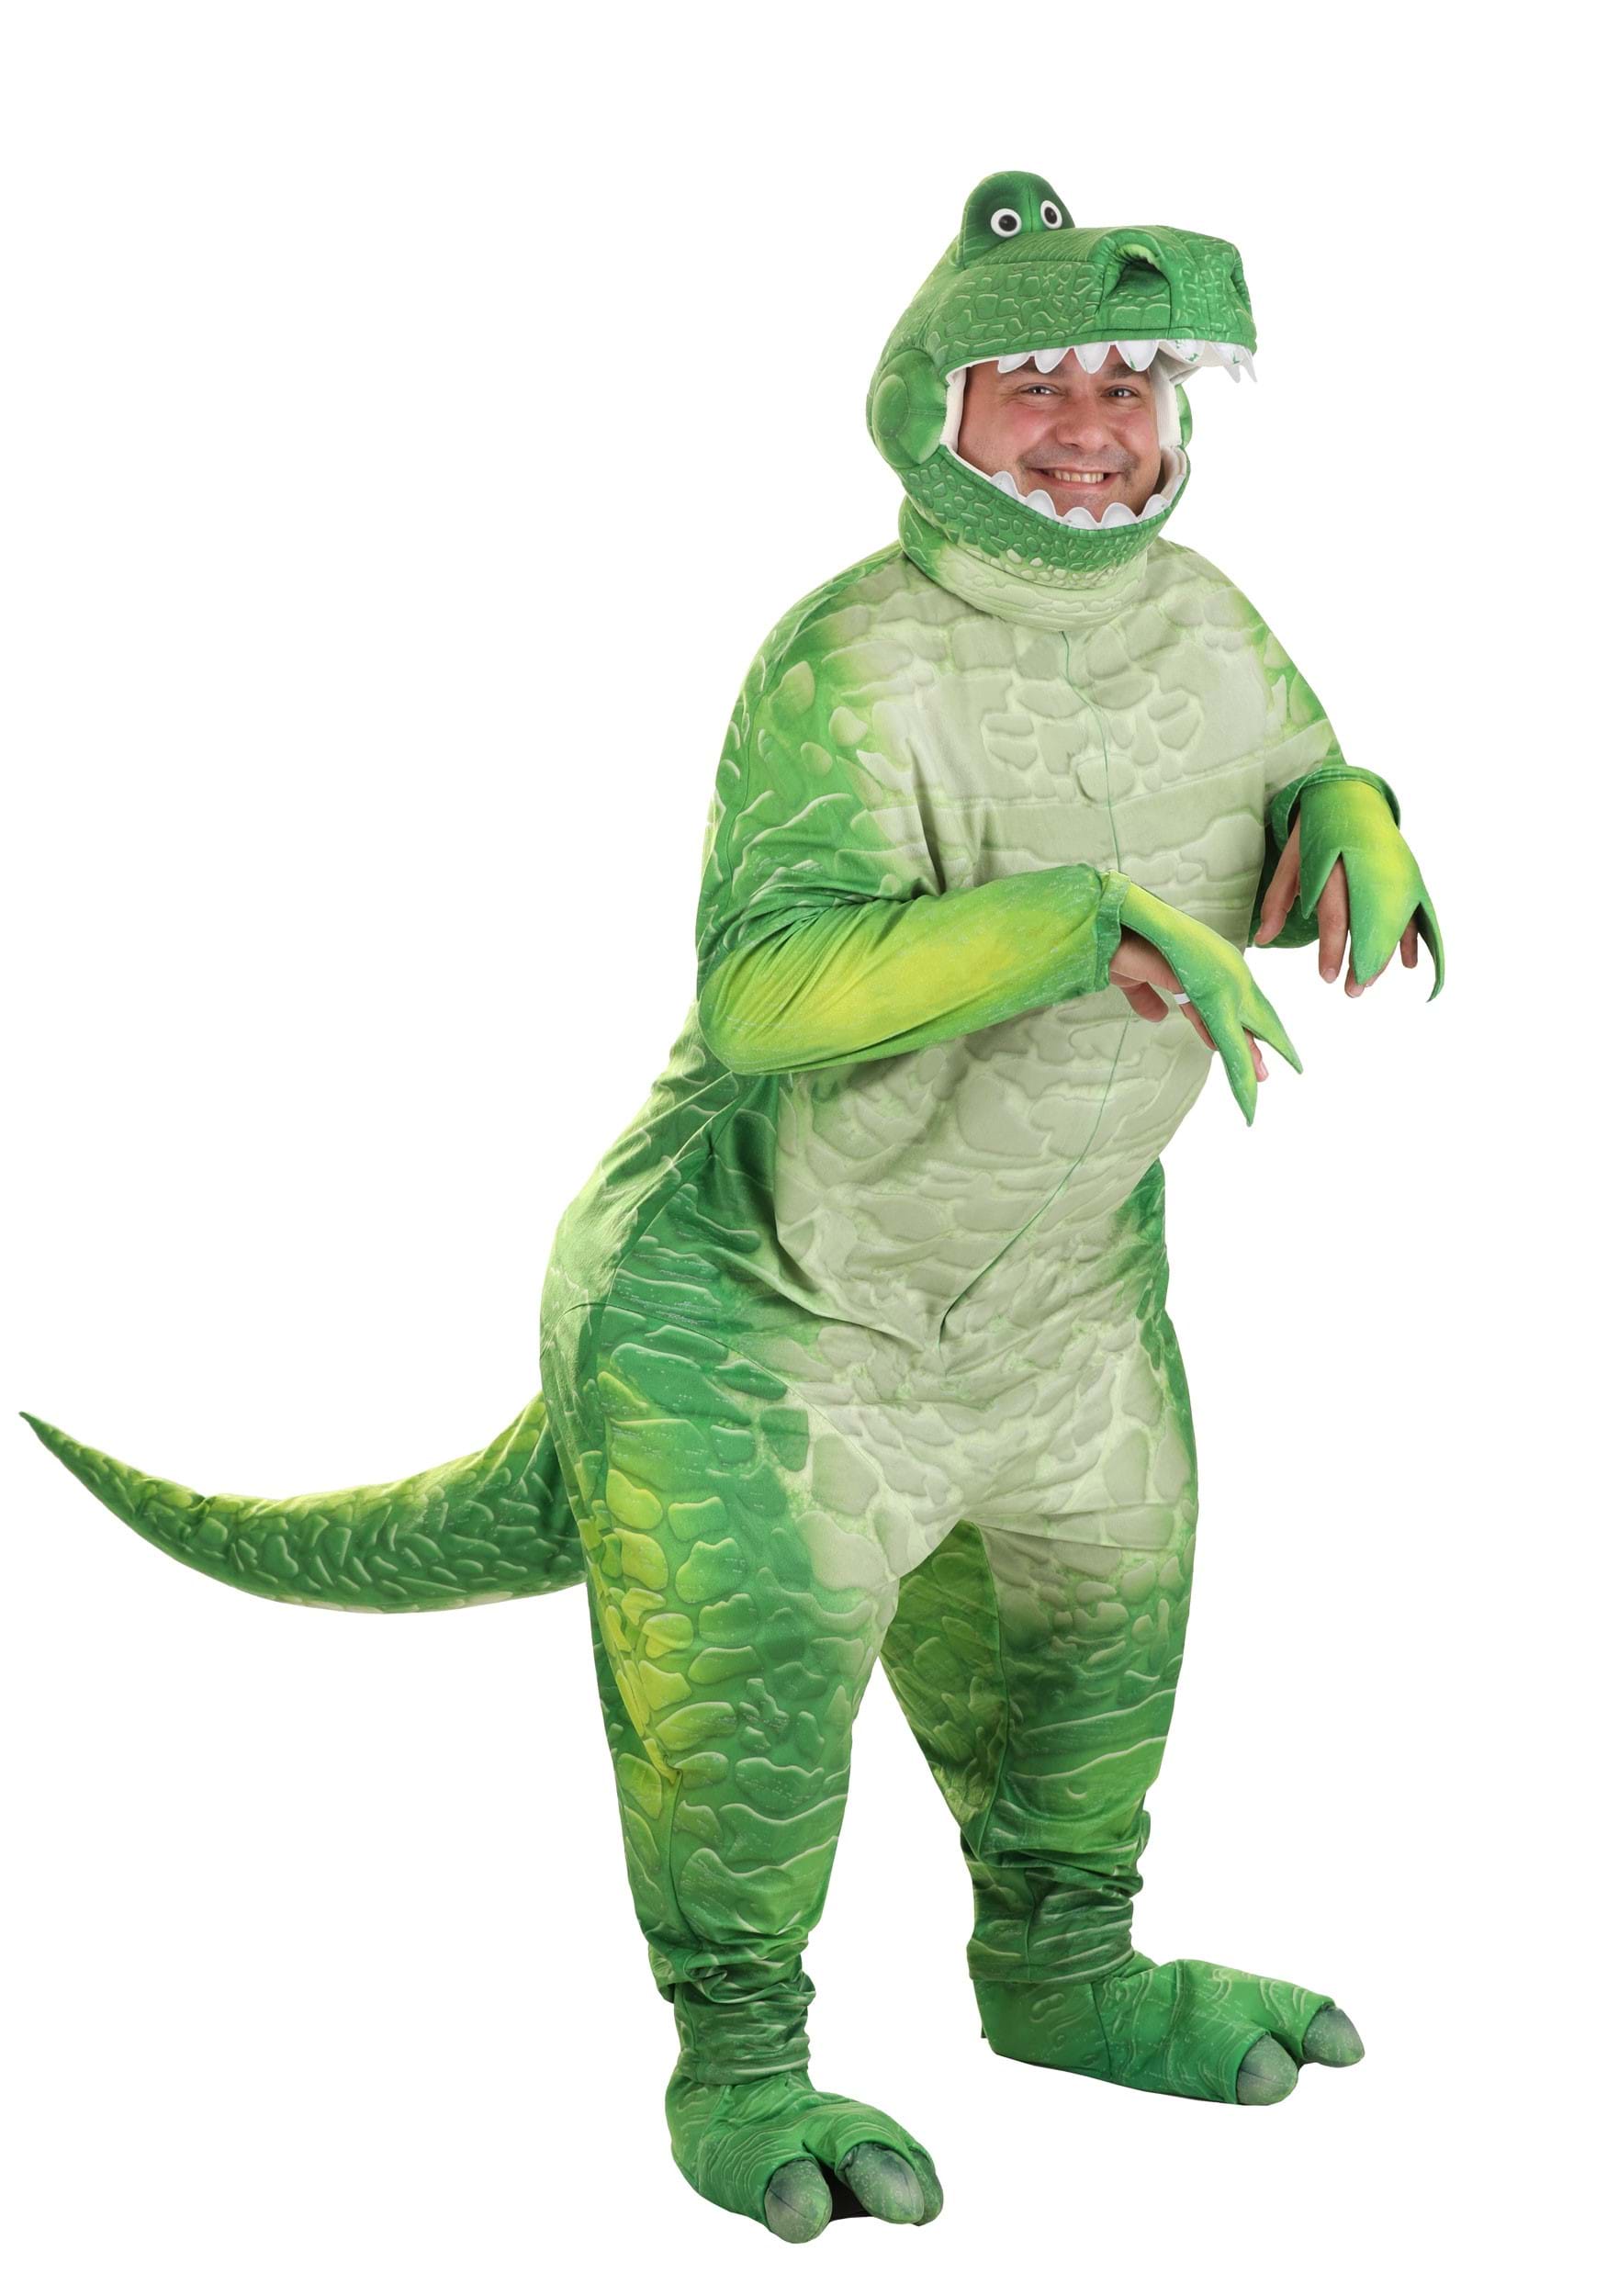 Photos - Fancy Dress Deluxe FUN Costumes Plus Size  Toy Story Rex Adult's Costume Green/Yell 